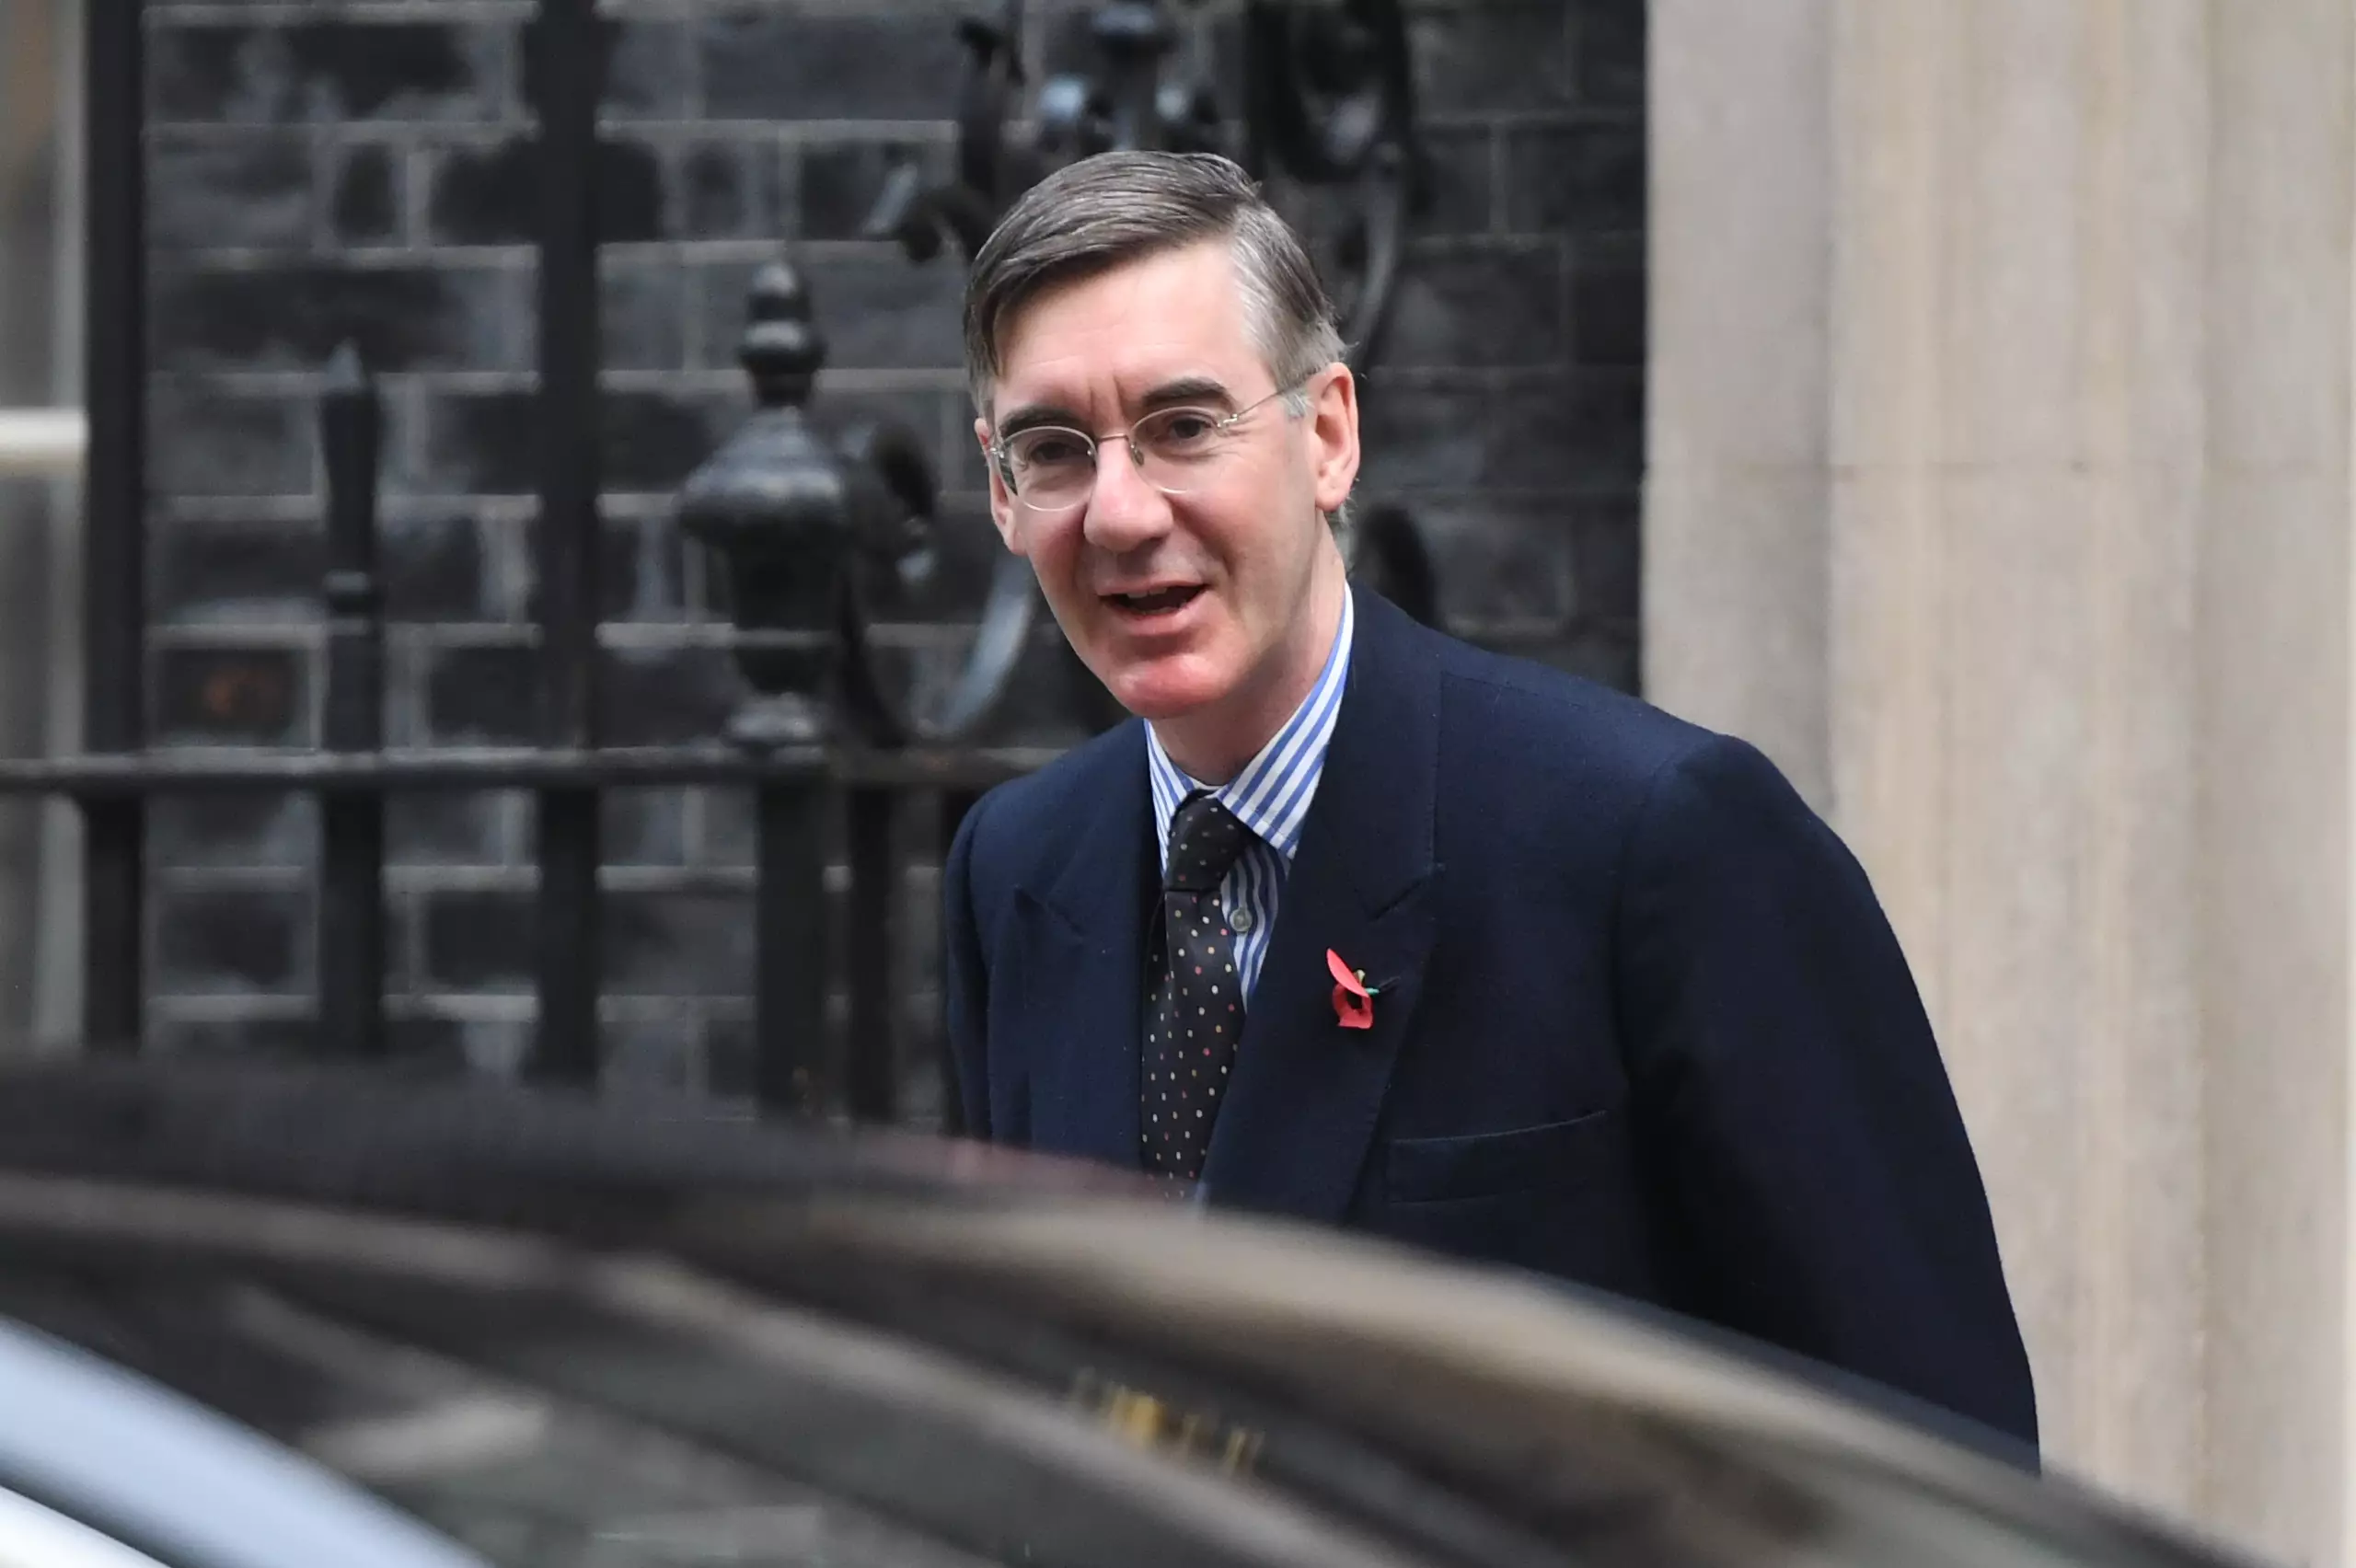 Rees-Mogg appeared on LBC.